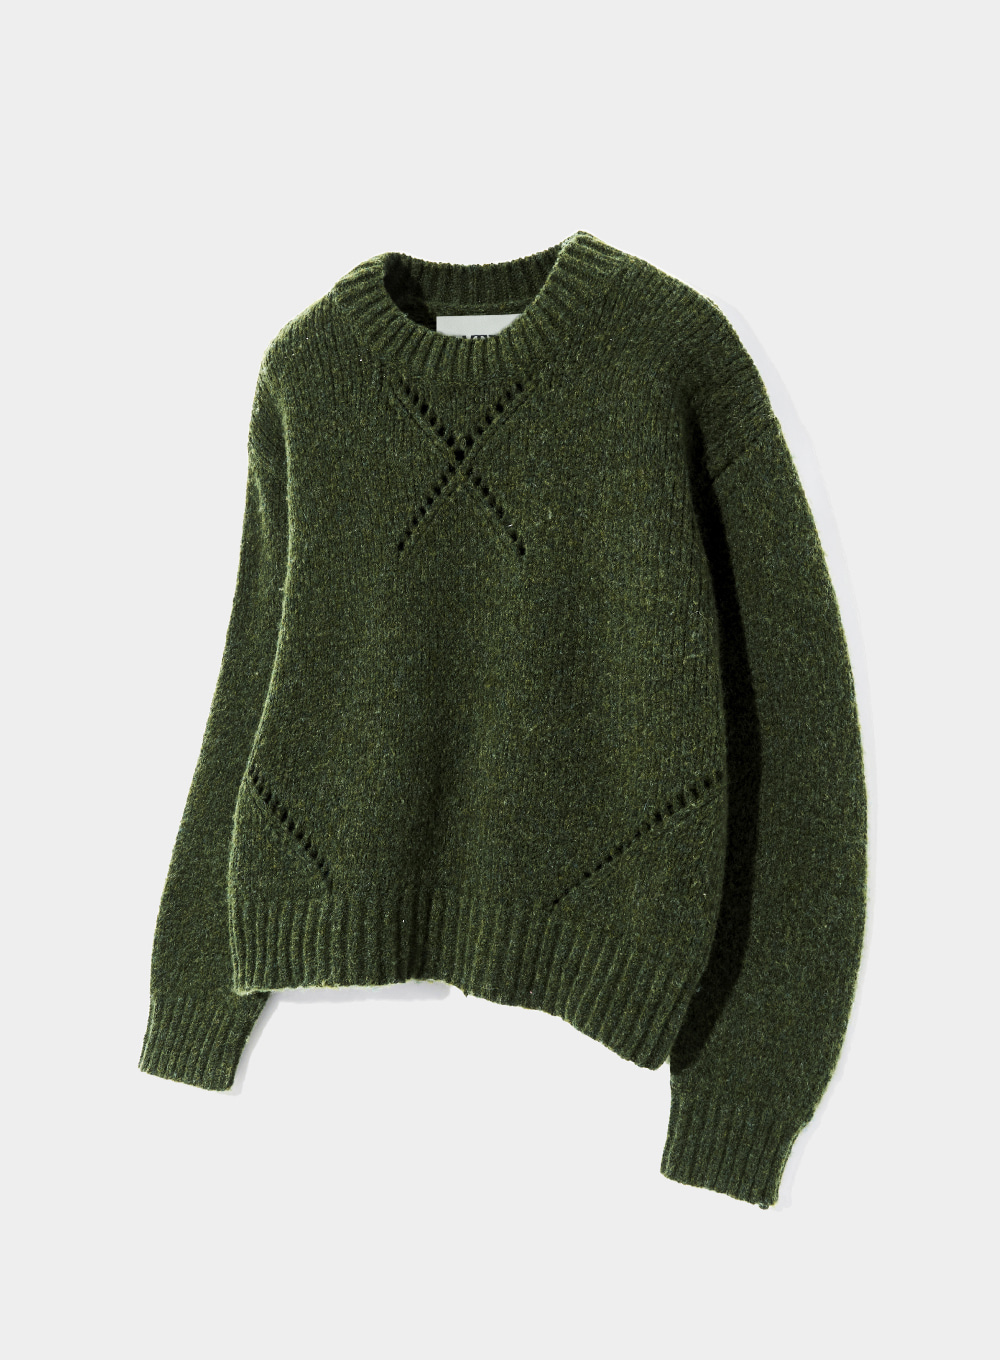 Cardiff Wool Blend Pullover Knit - Olive Khaki